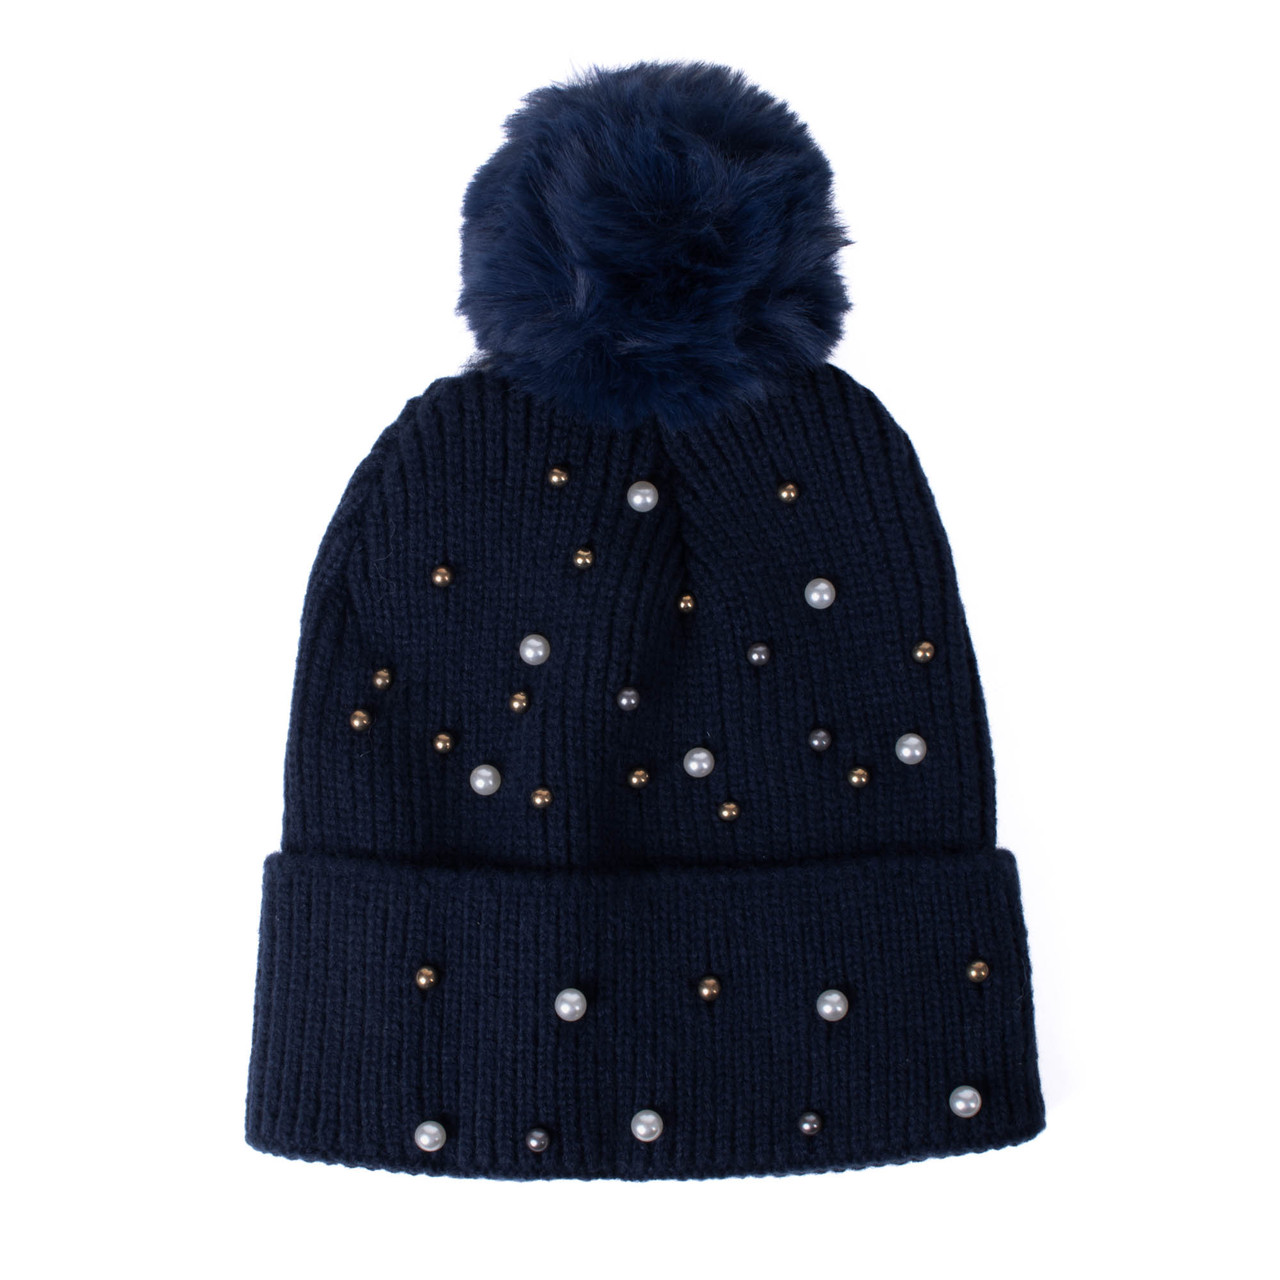 Ladies Winter Knit Hat with Colorful Pearls and Pom 100% Acrylic-LKH5040 Black